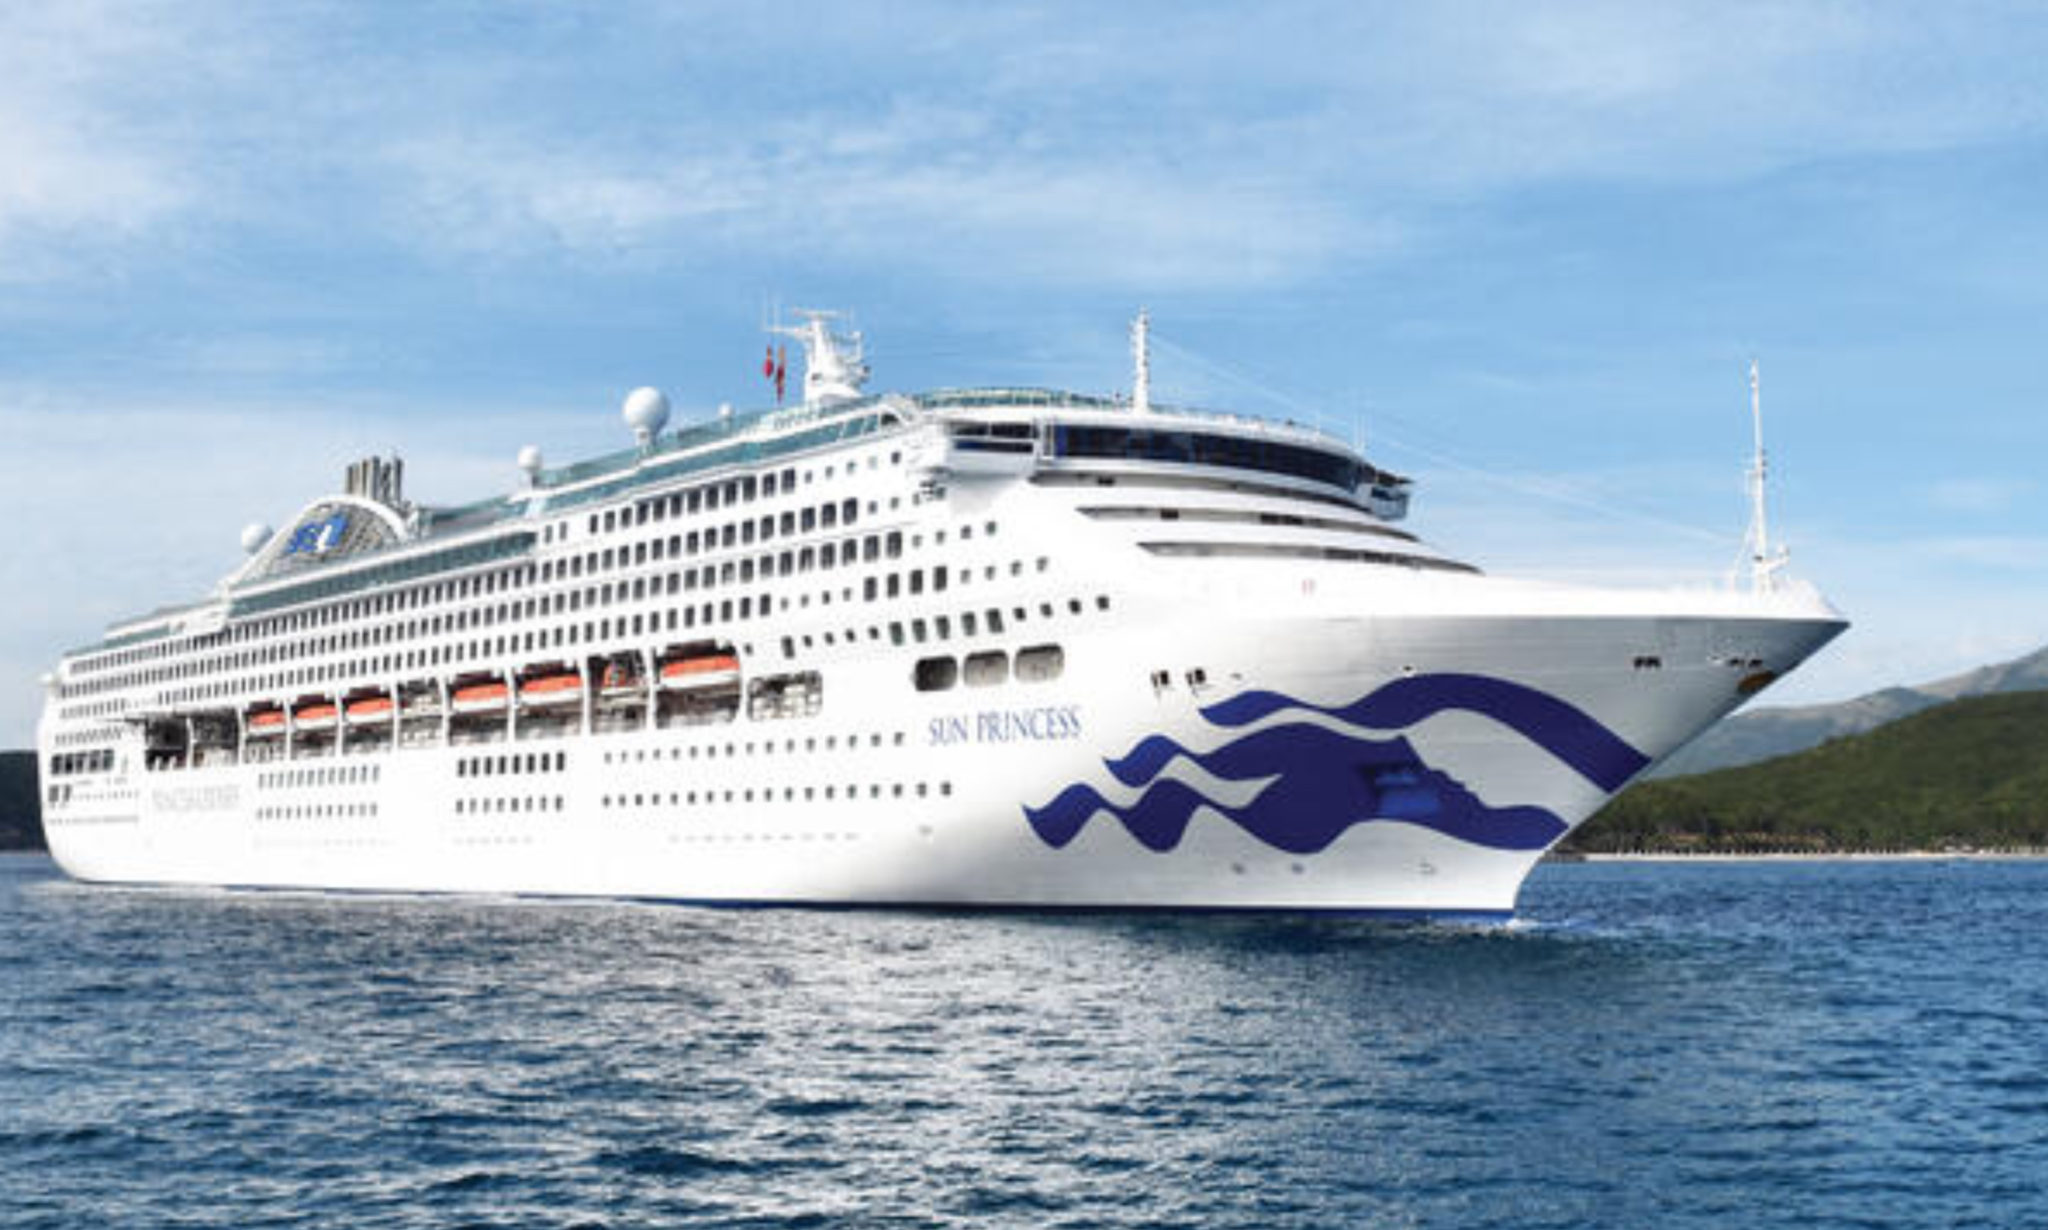 Sun Princess cruise ship met by violent protests upon docking at